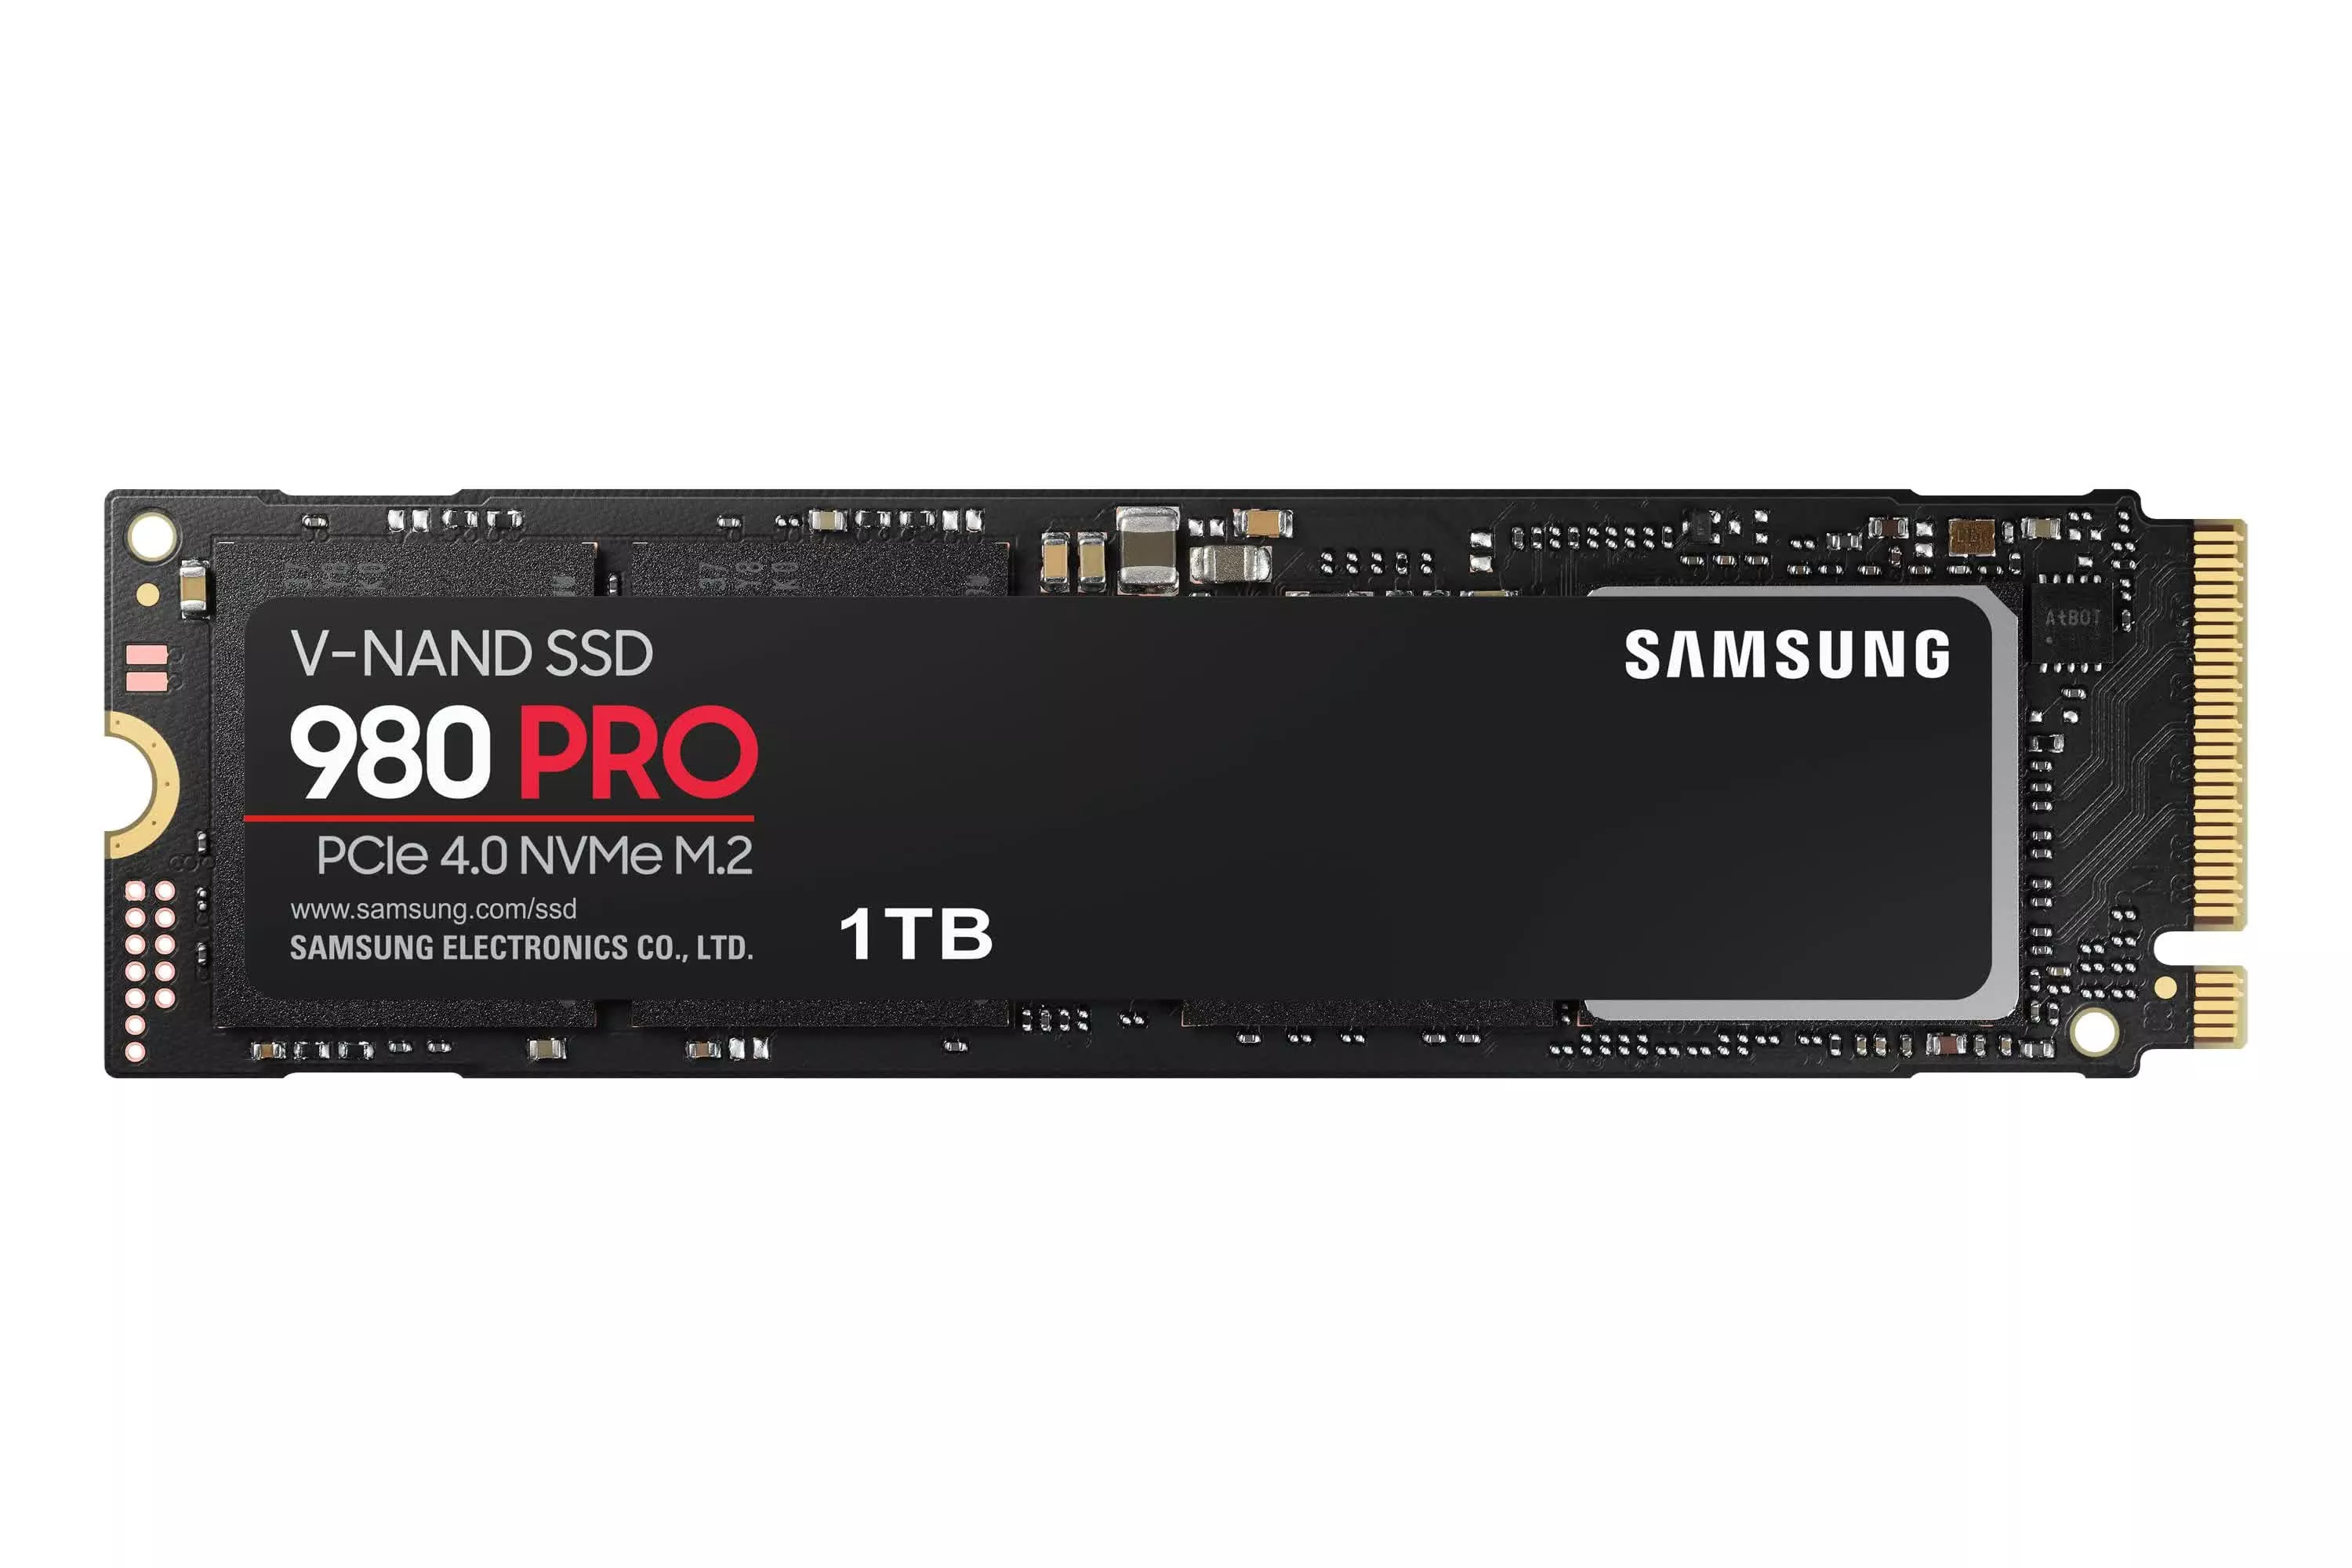 Samsung 980 Pro NVMe PCIe 4.0 SSD Reviews, Pros and Cons | TechSpot